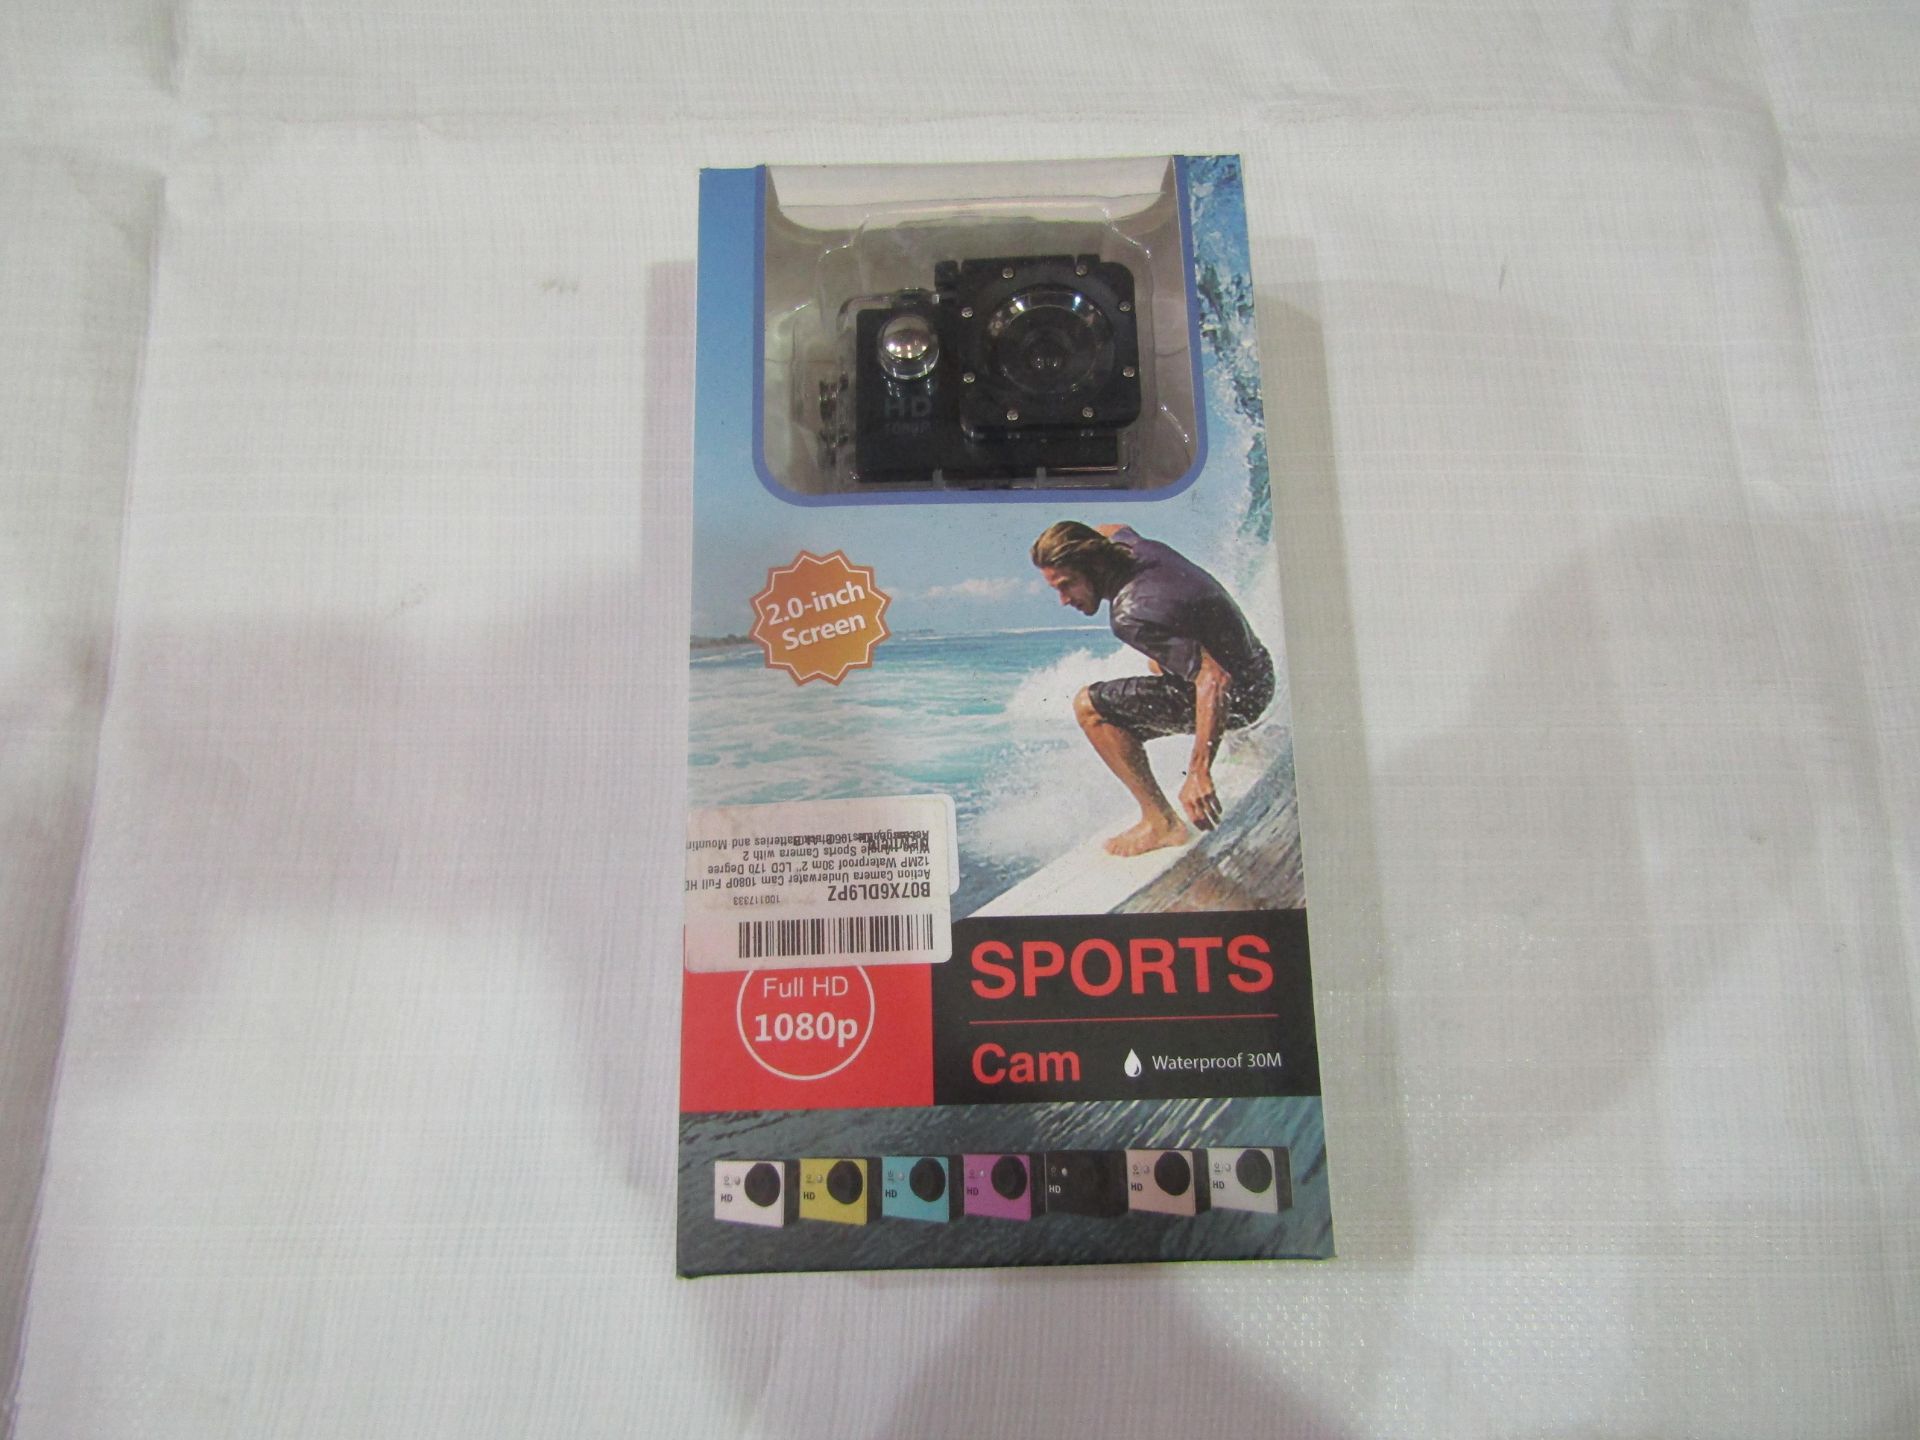 1080p Sports Camera, Waterproof To 30m, Full HD, 12mp LCD 170 Degree Wide Angle - Unchecked &